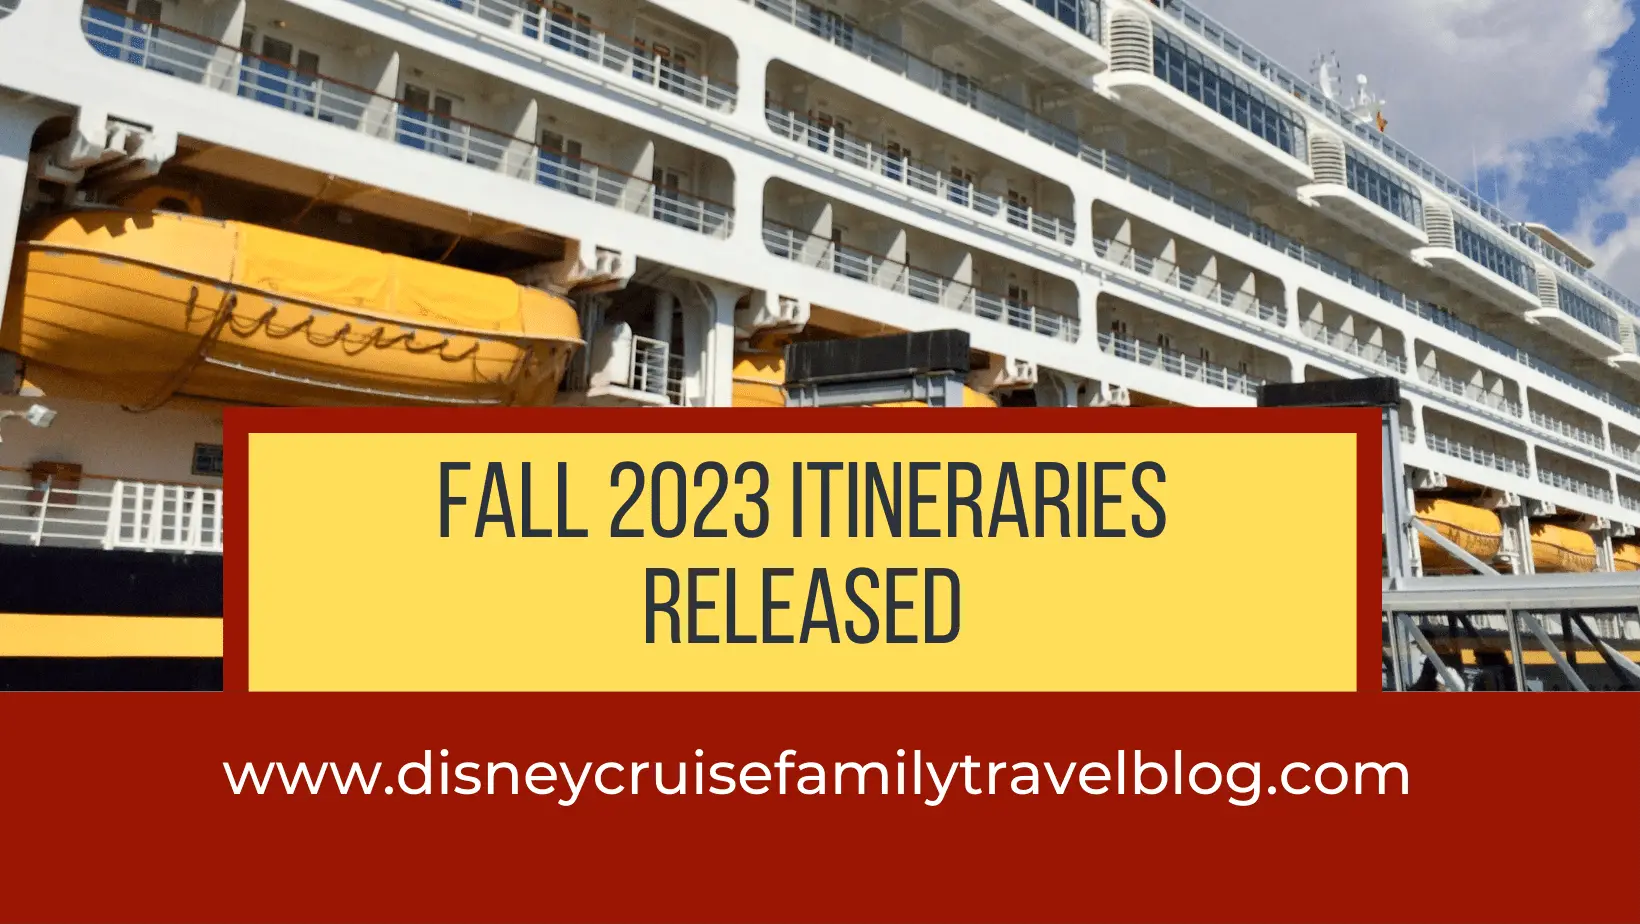 Fall 2023 Itineraries Released The Disney Cruise Family Travel Blog